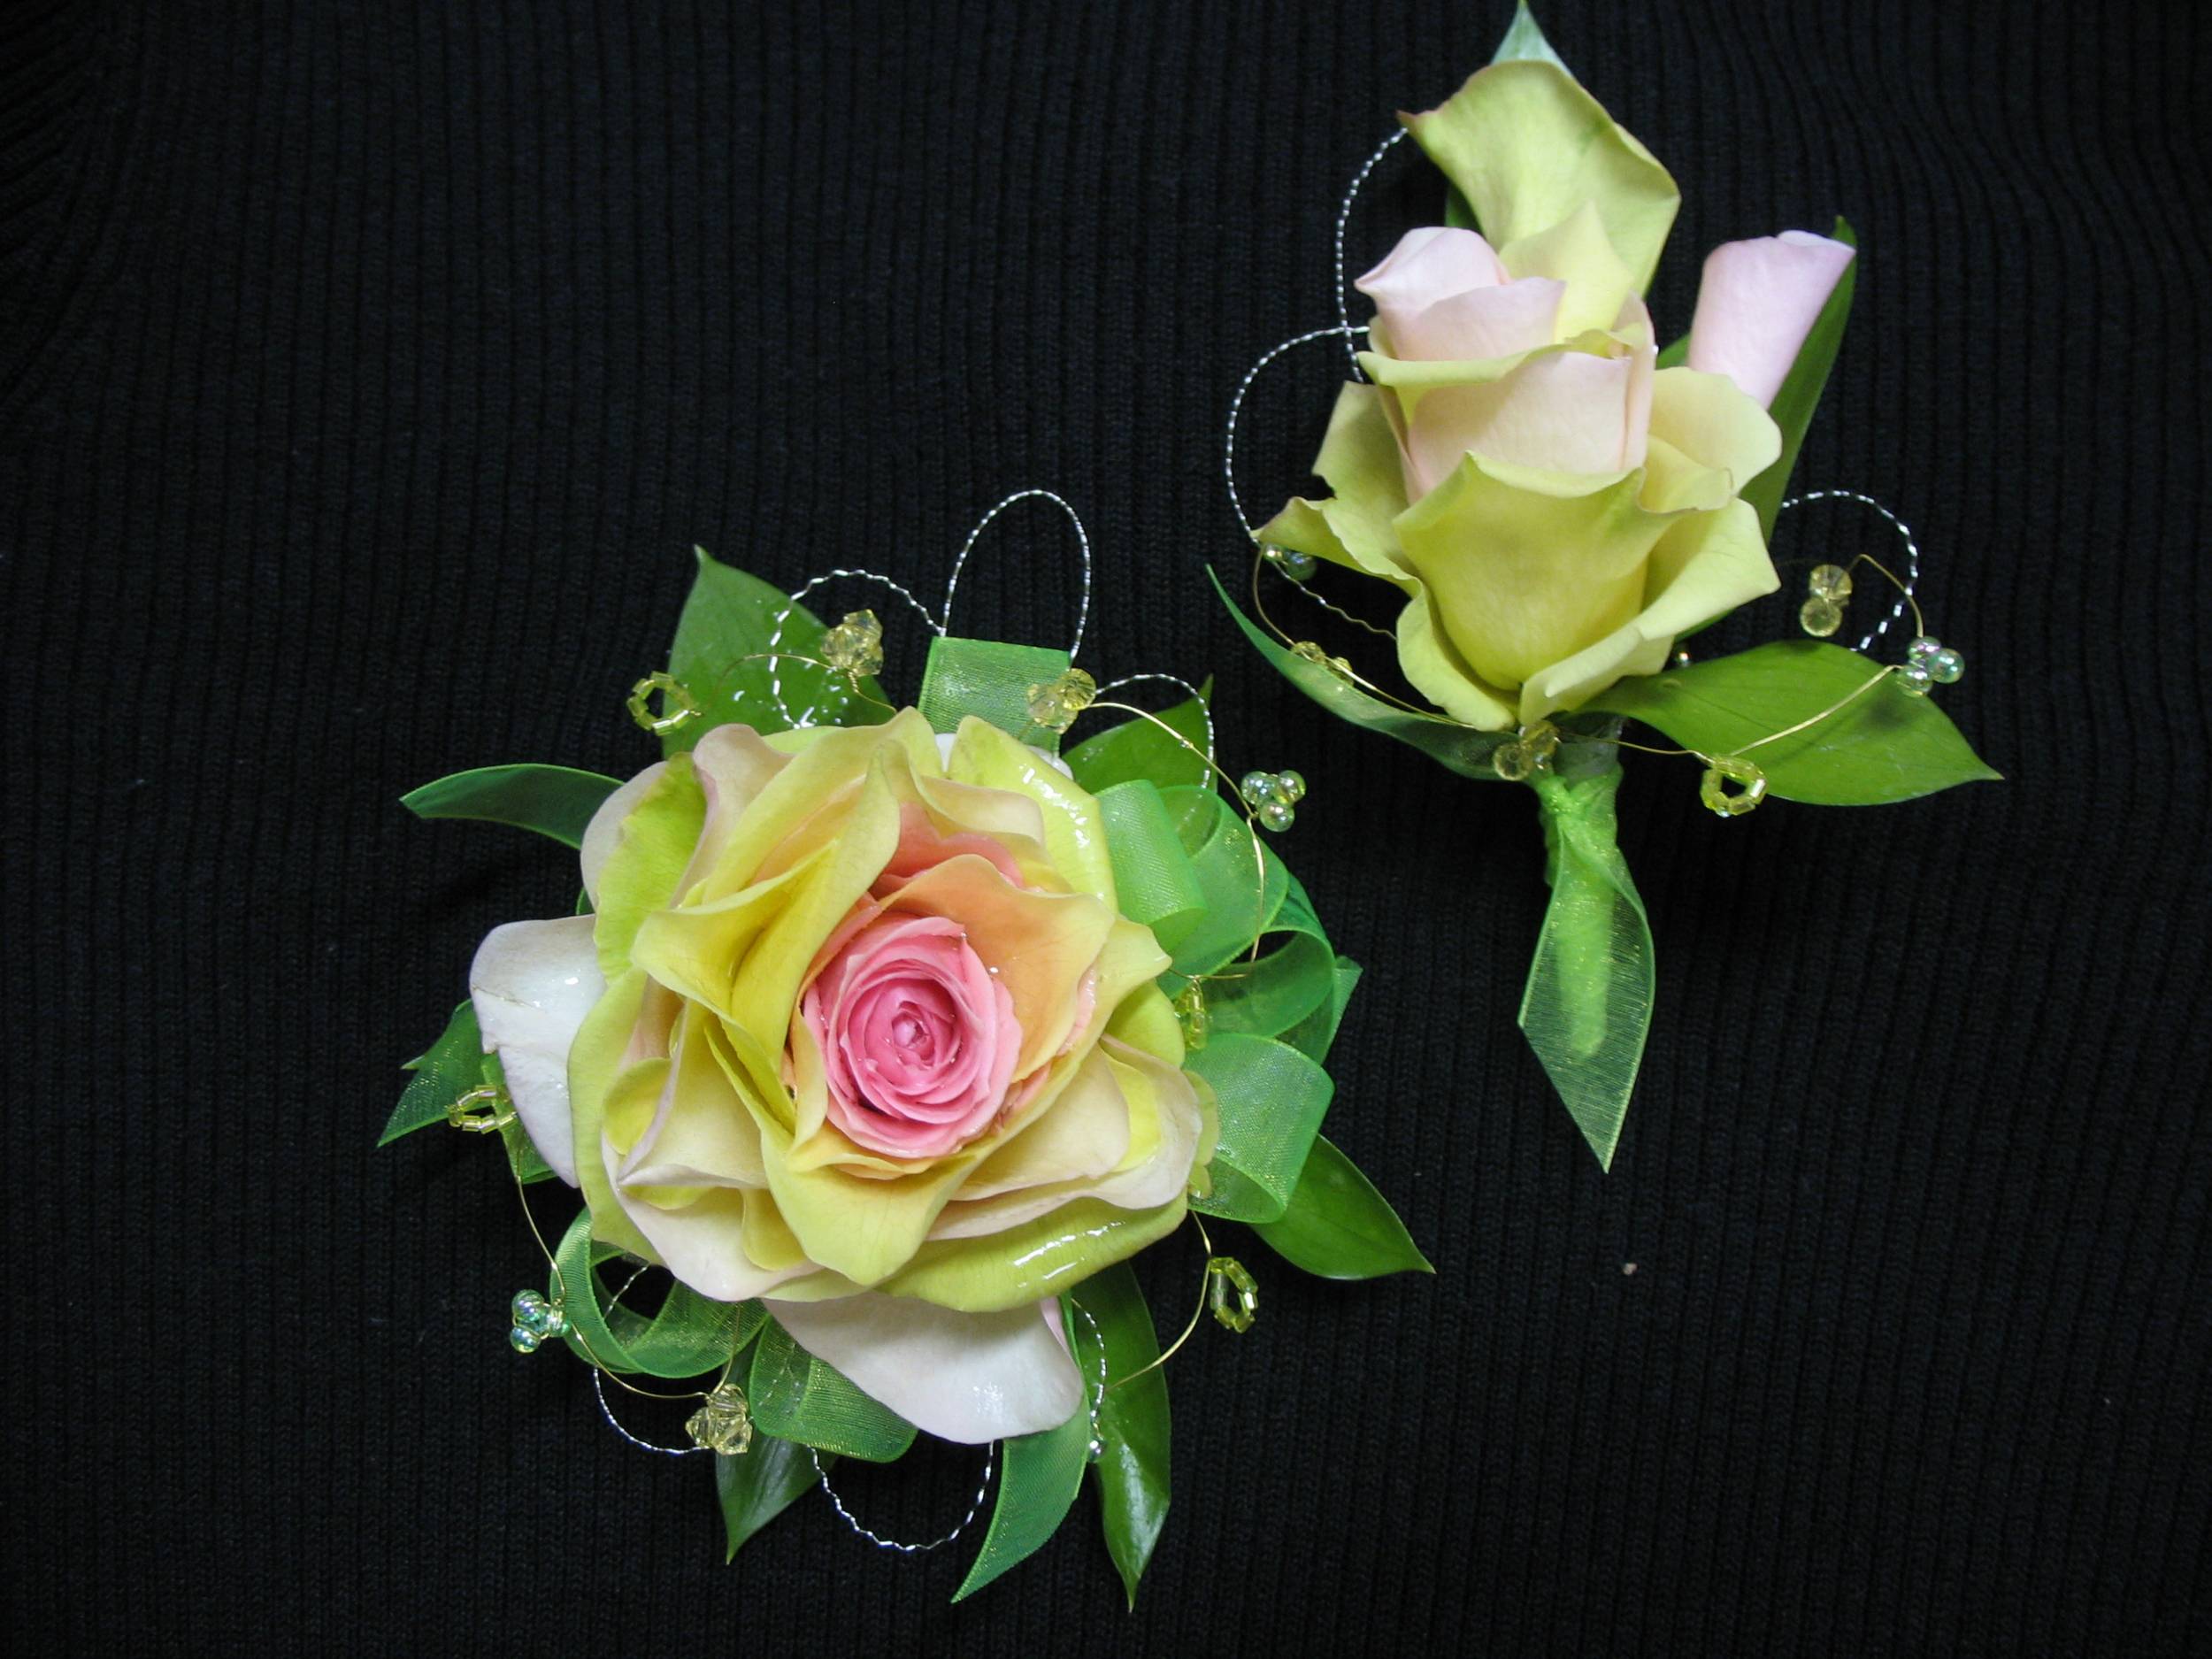 Pink and green composite rose corsage & bout